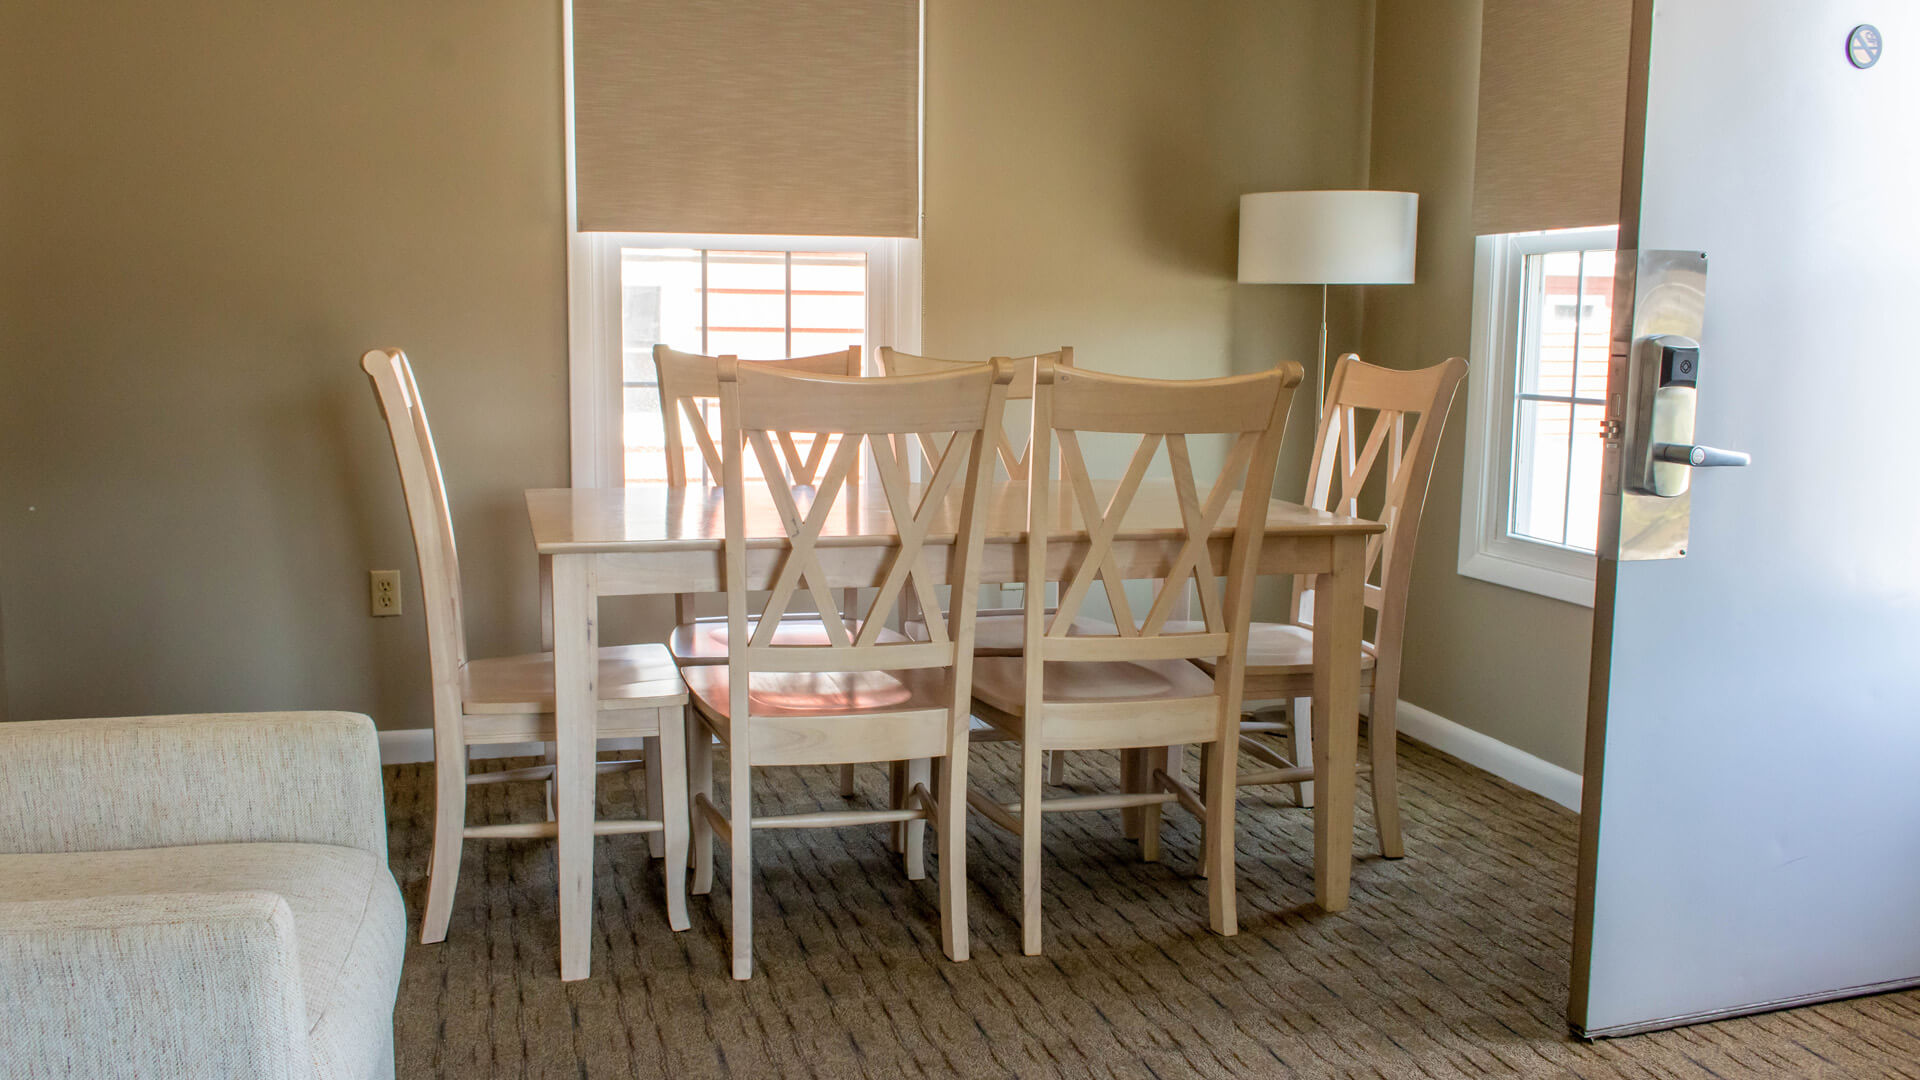 Vacation Homes 600-613 room with dining table and chairs